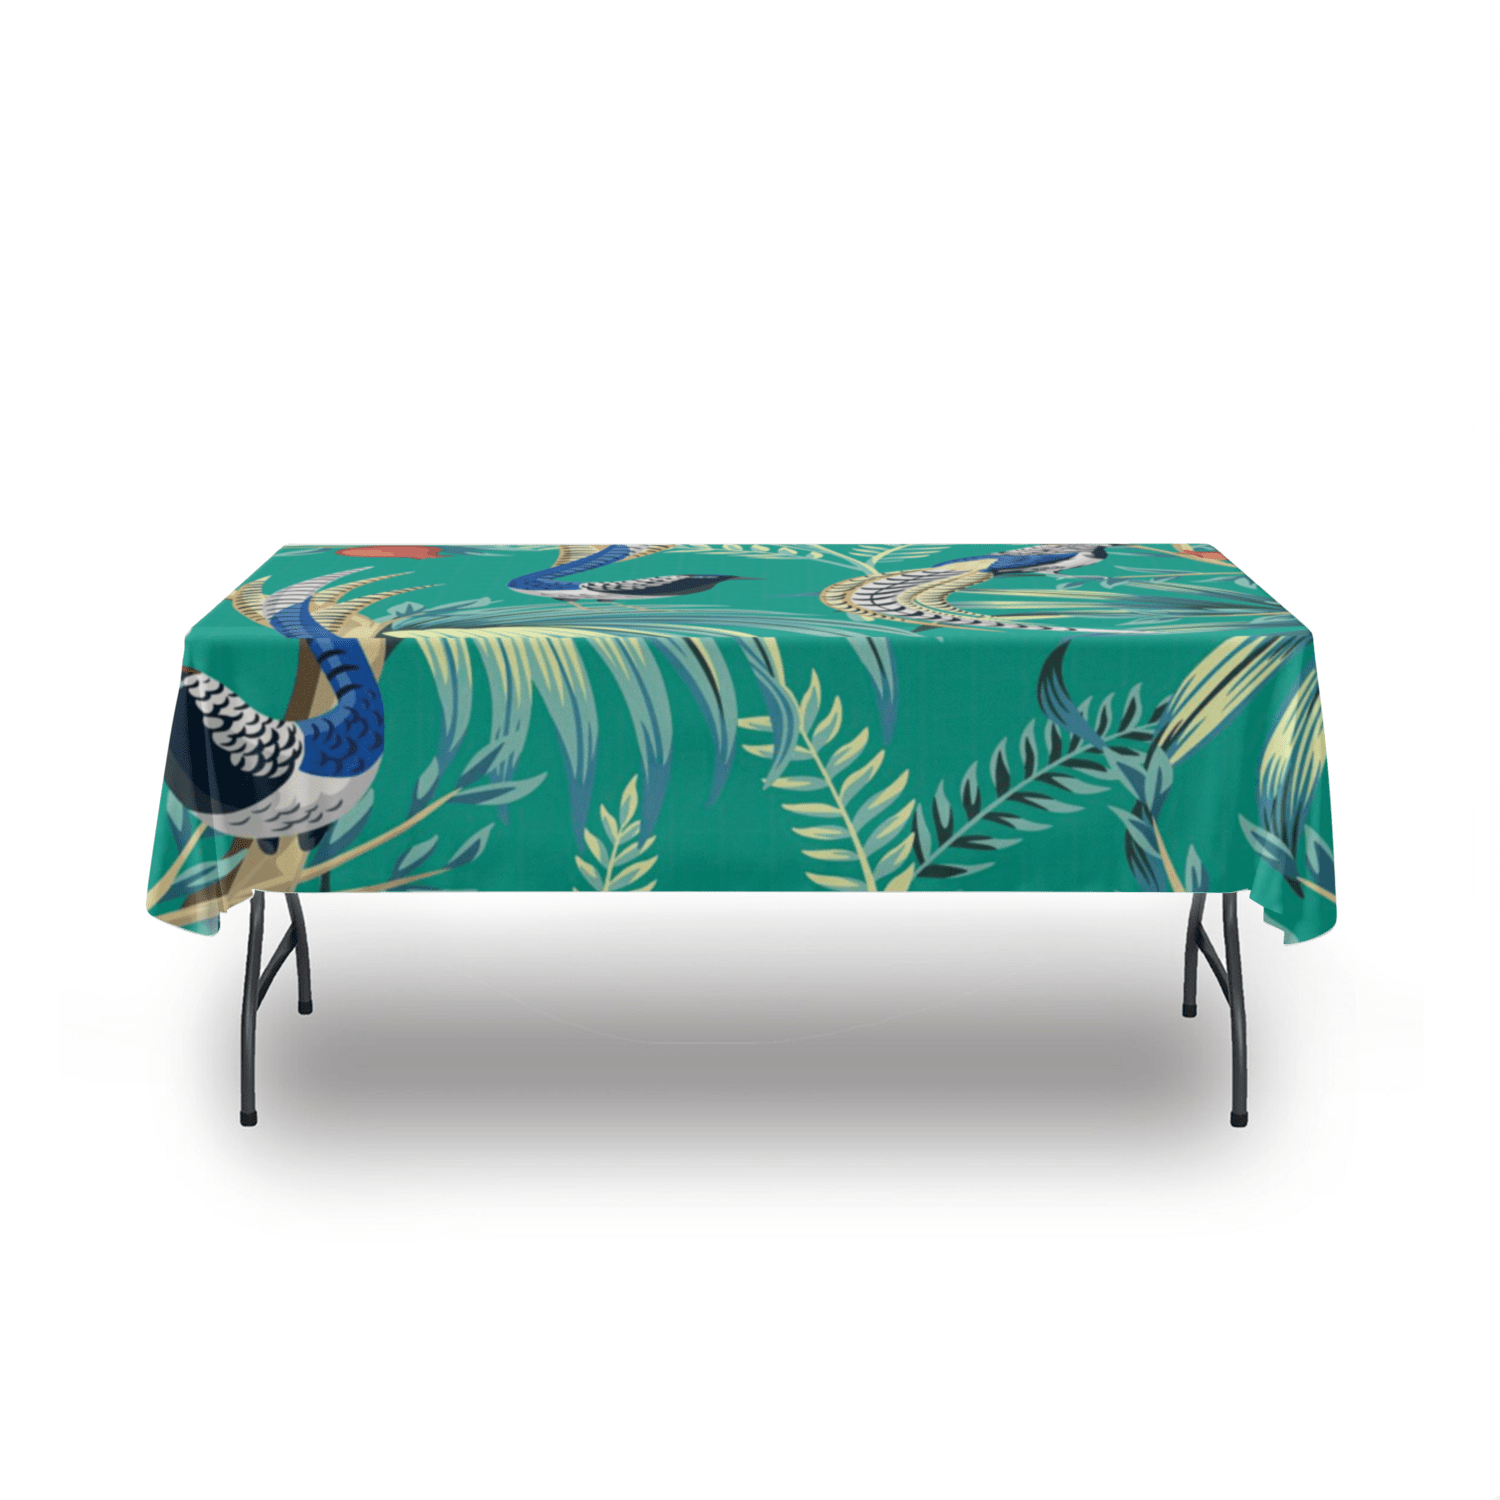 kate-mcenroe-nyc Chinoiserie Green Peacock Tablecloth Tablecloths 54" x 72" 100244